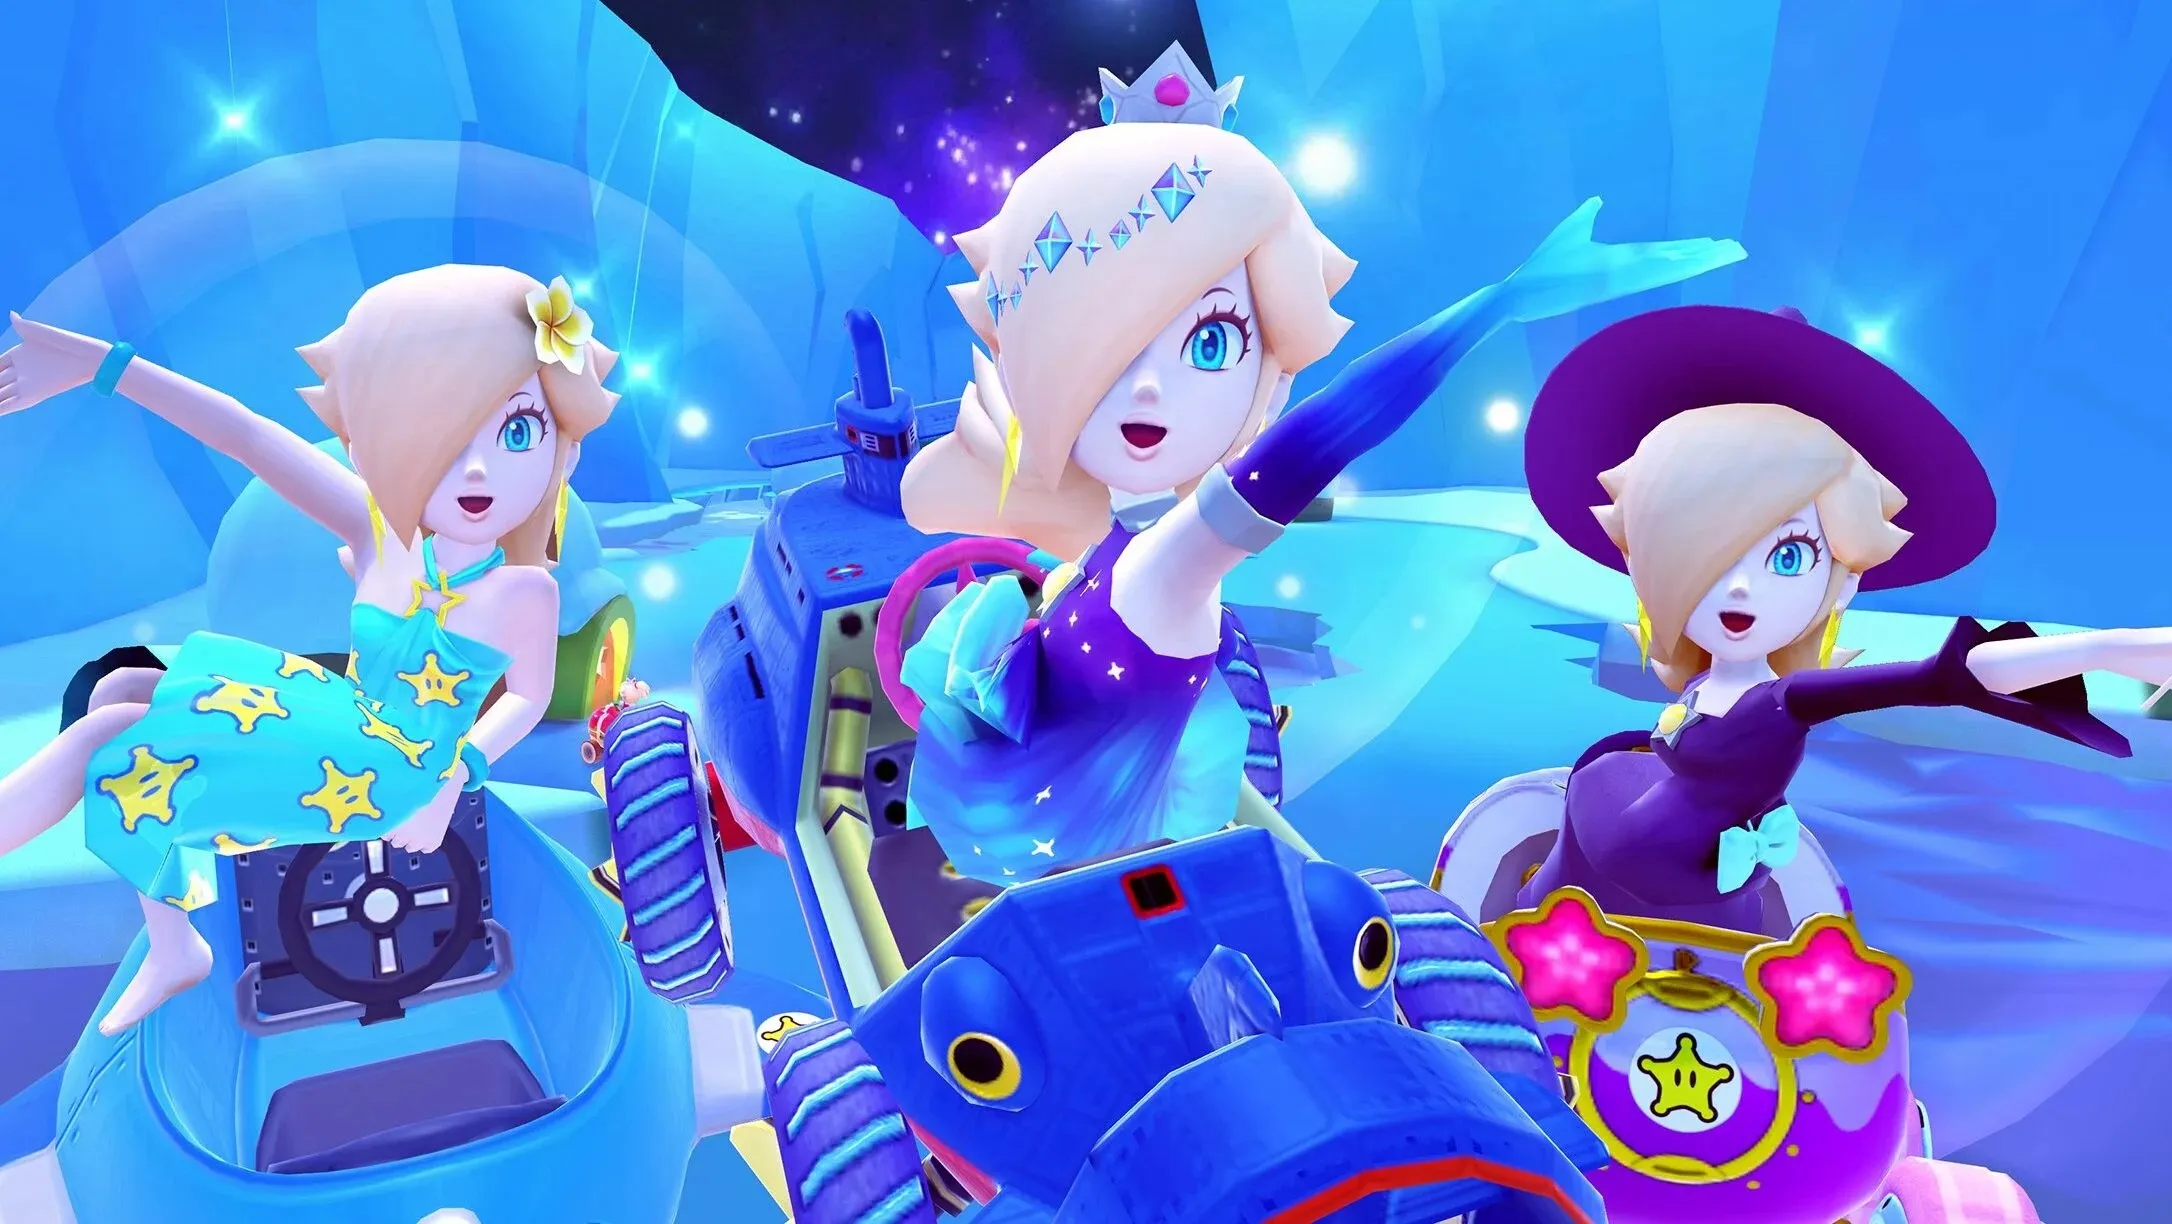 Mario Kart Tour will Drop Its Gacha Elements in Favor of a